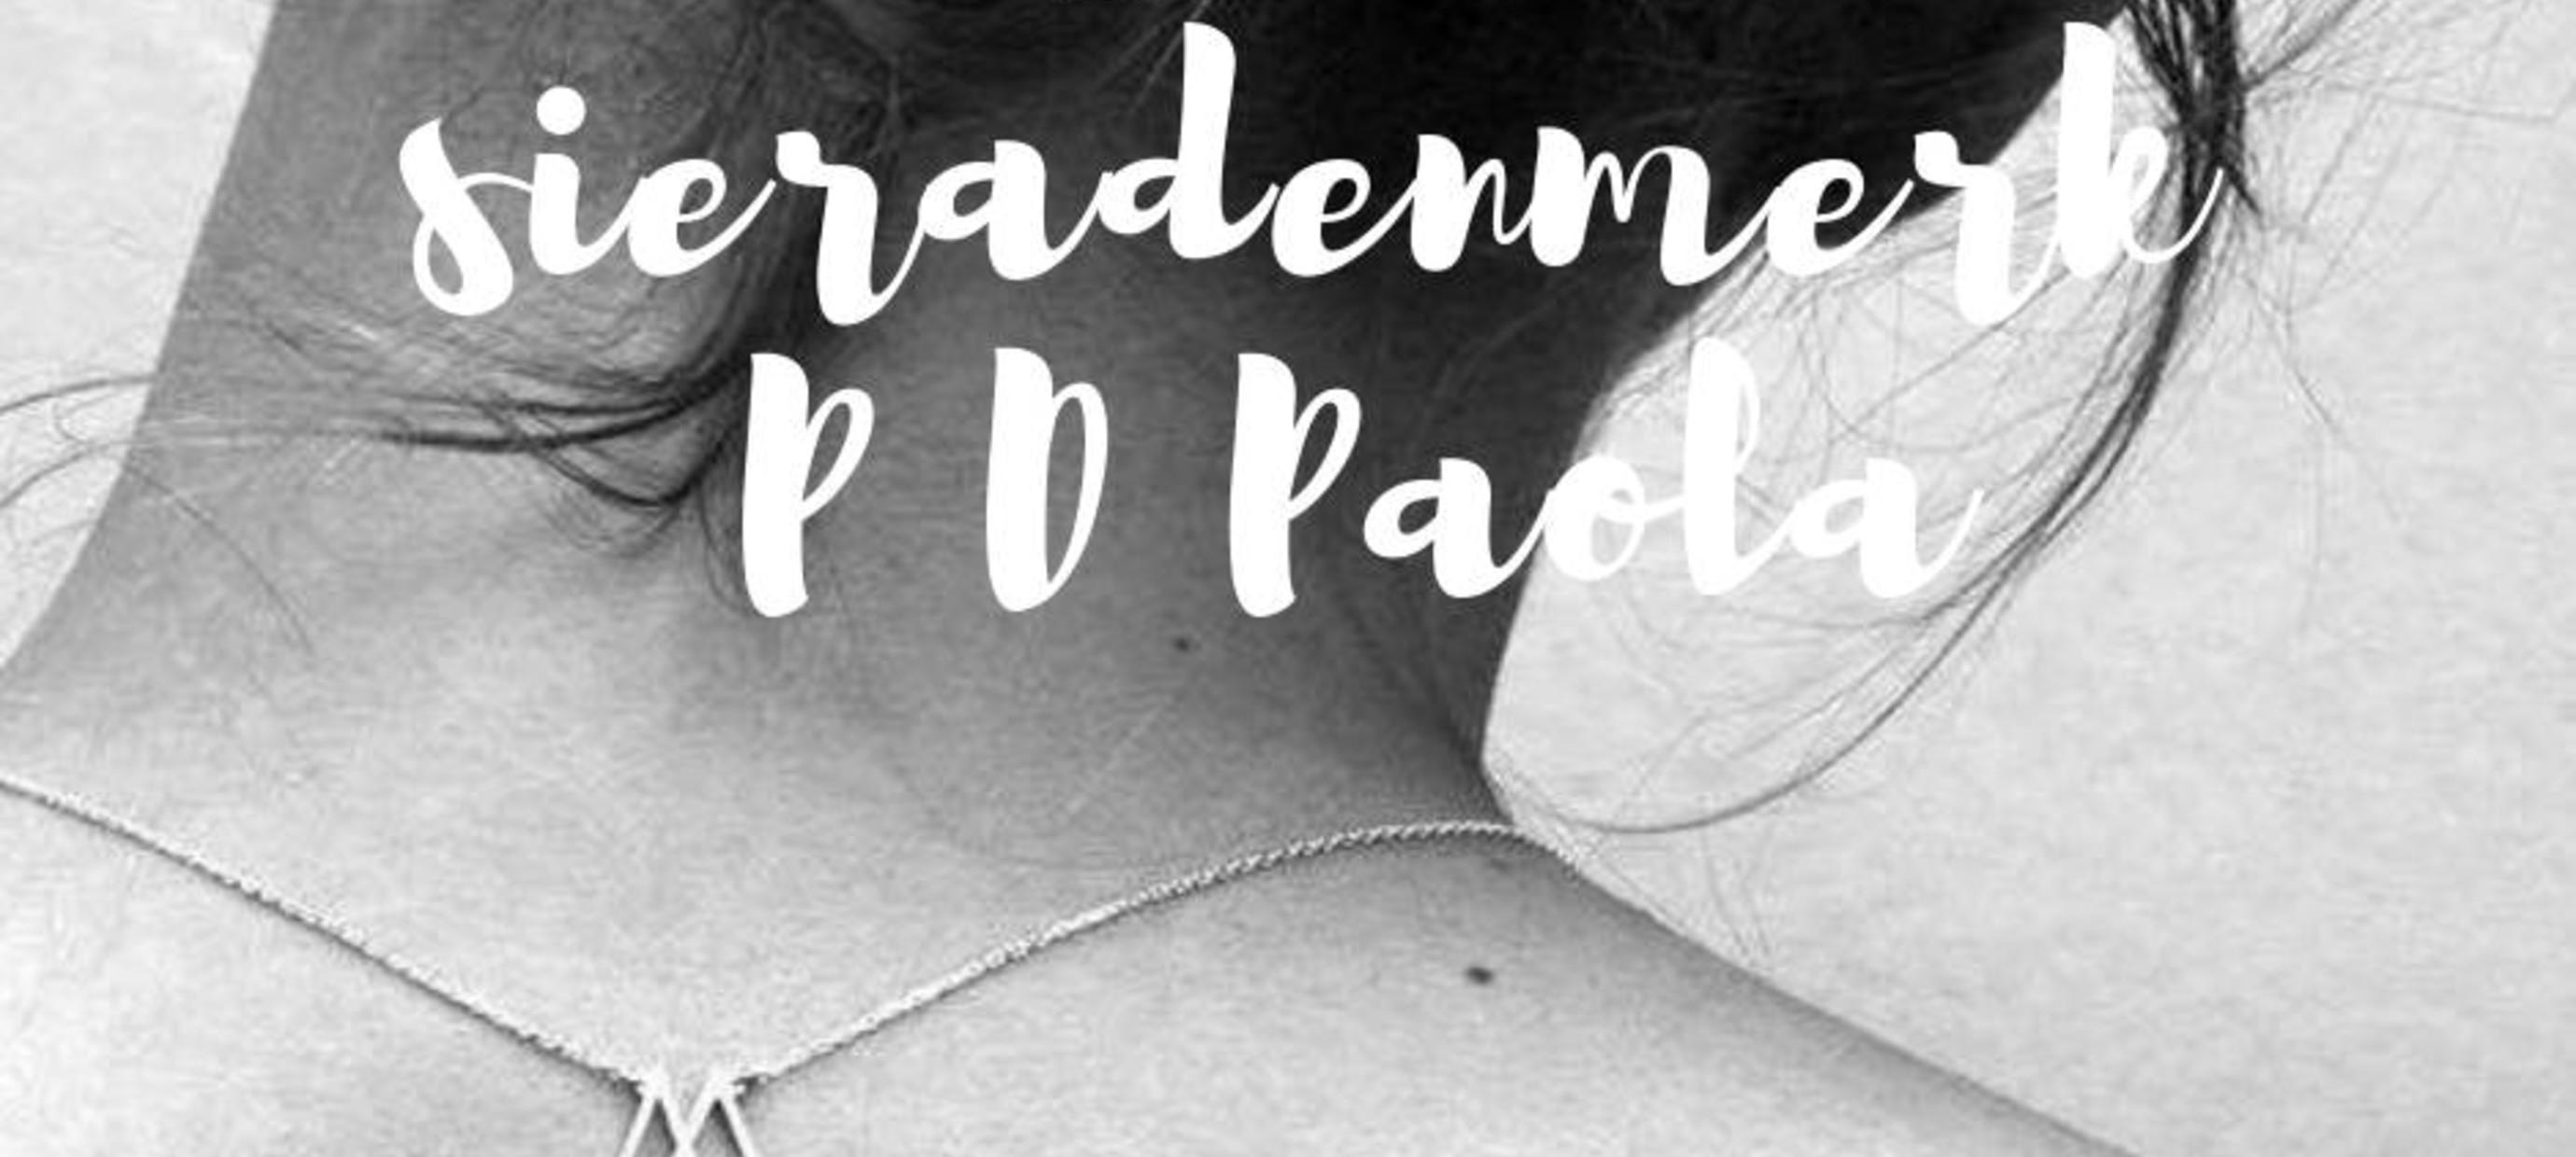 Musthave: sieradenmerk P D Paola